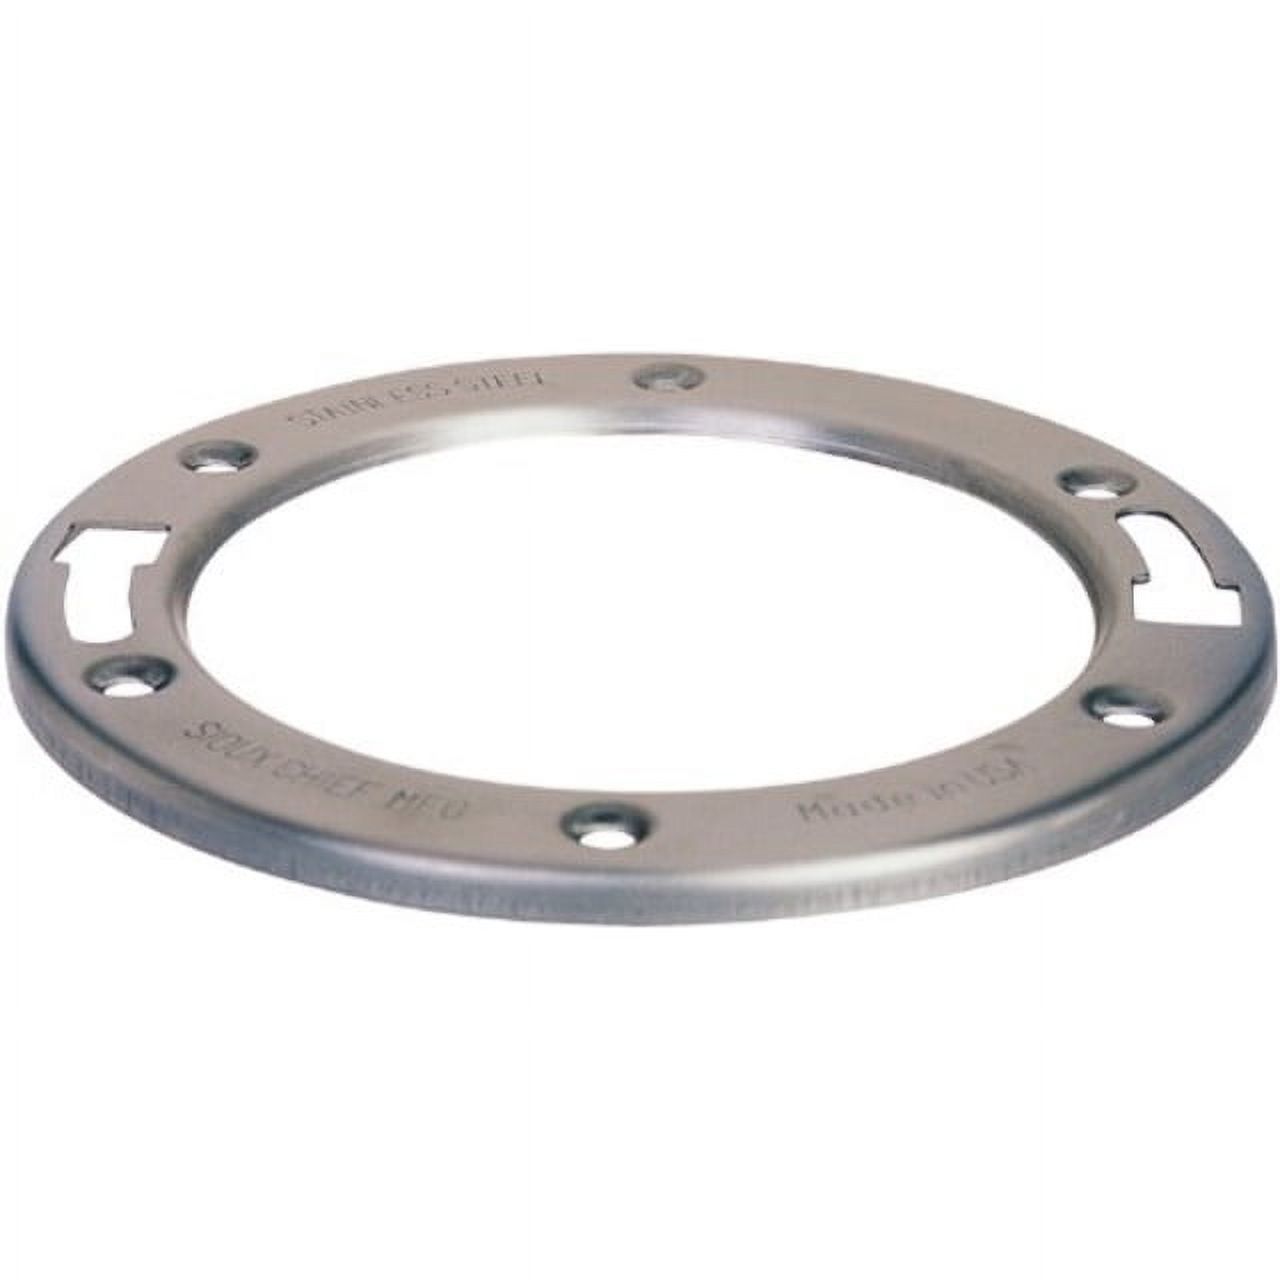 Sioux Chief Mfg 886-MR 866-S3I S/S Closet Flange Ring Pack of 1 Stainless Steel - image 1 of 3